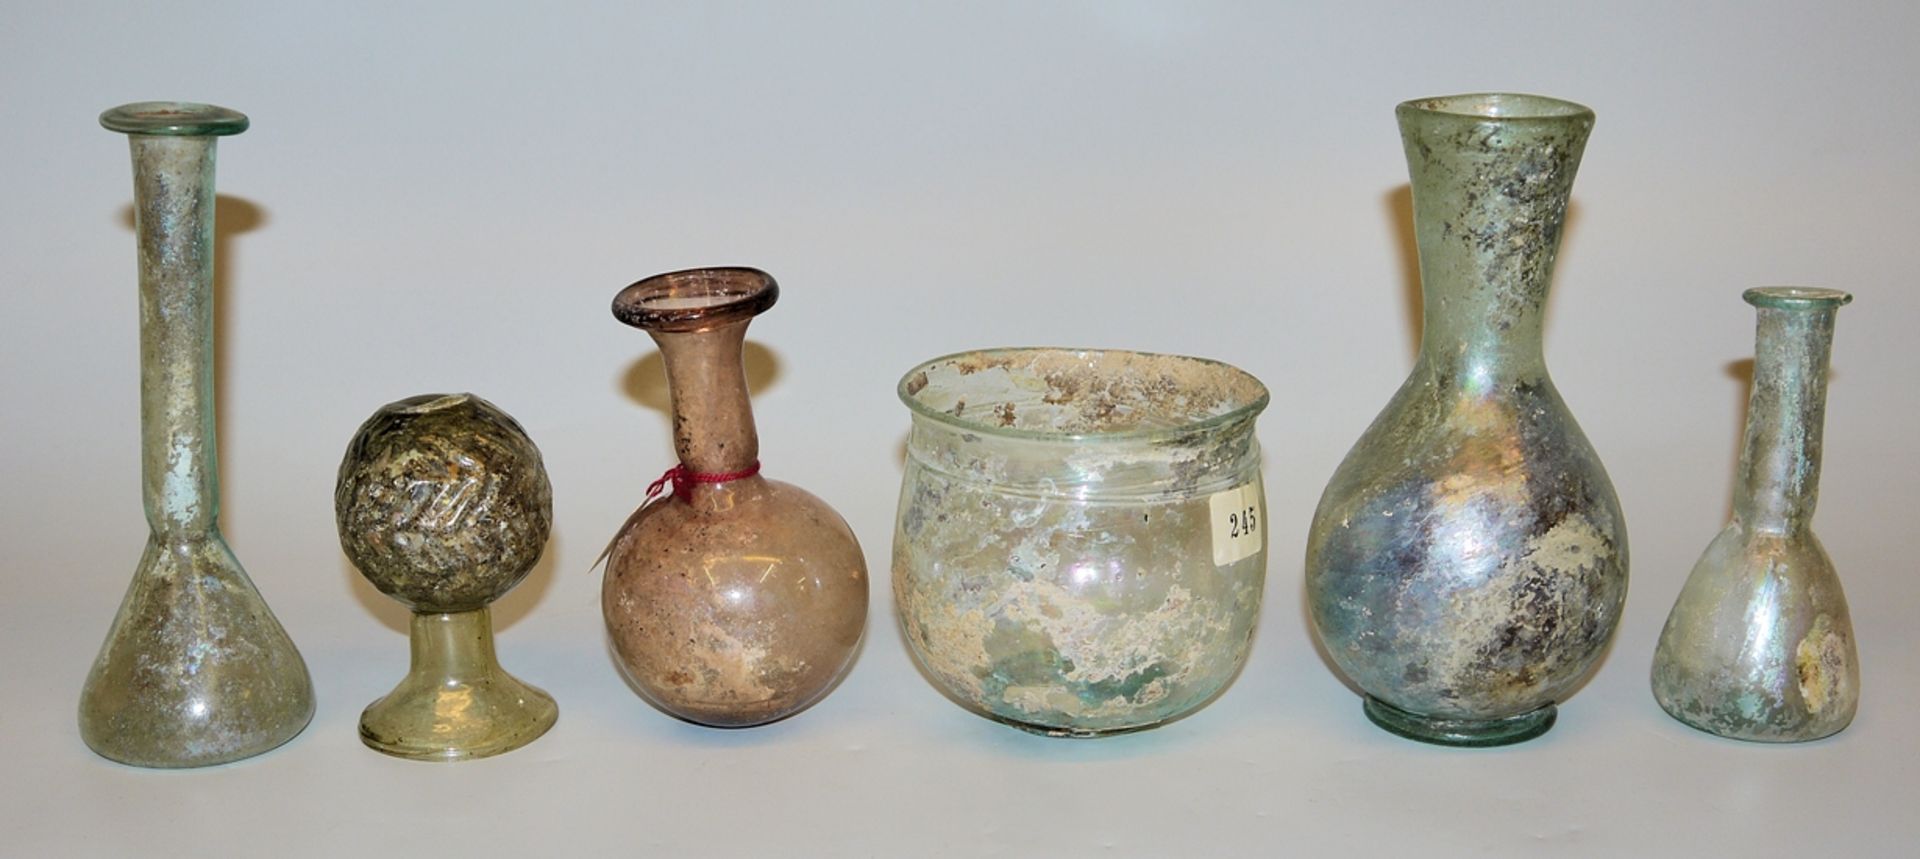 Six Roman jars, 1st-3rd century, from an old collection with family document